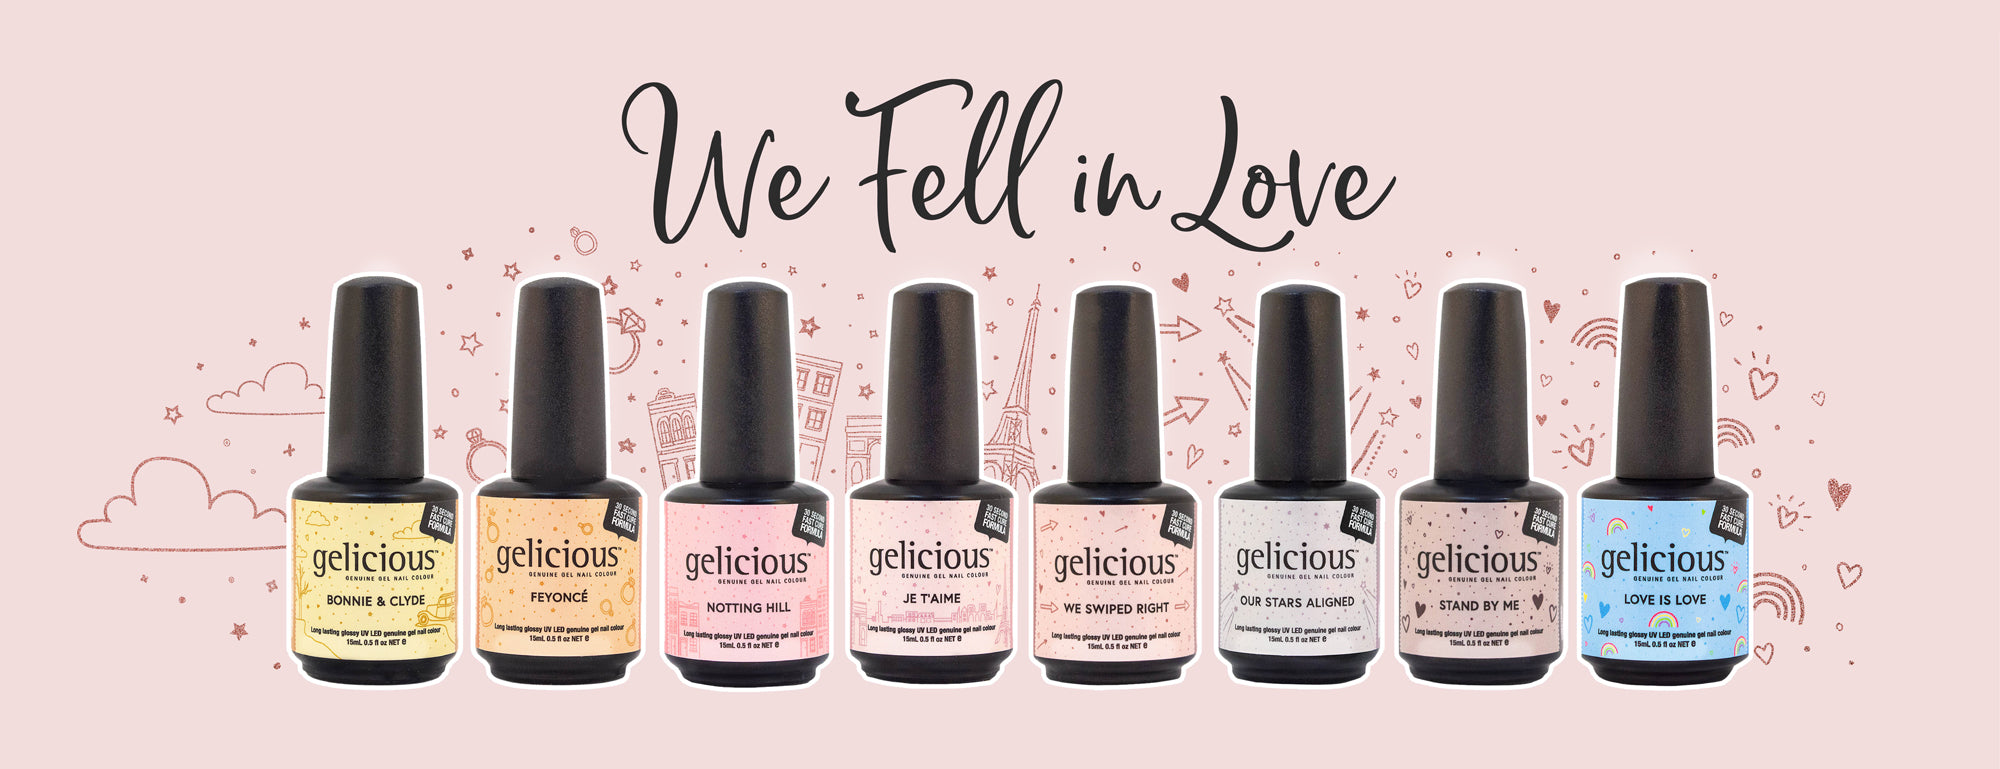 Peel Off Nail Gel - Gelicious We Fell In Love Collection